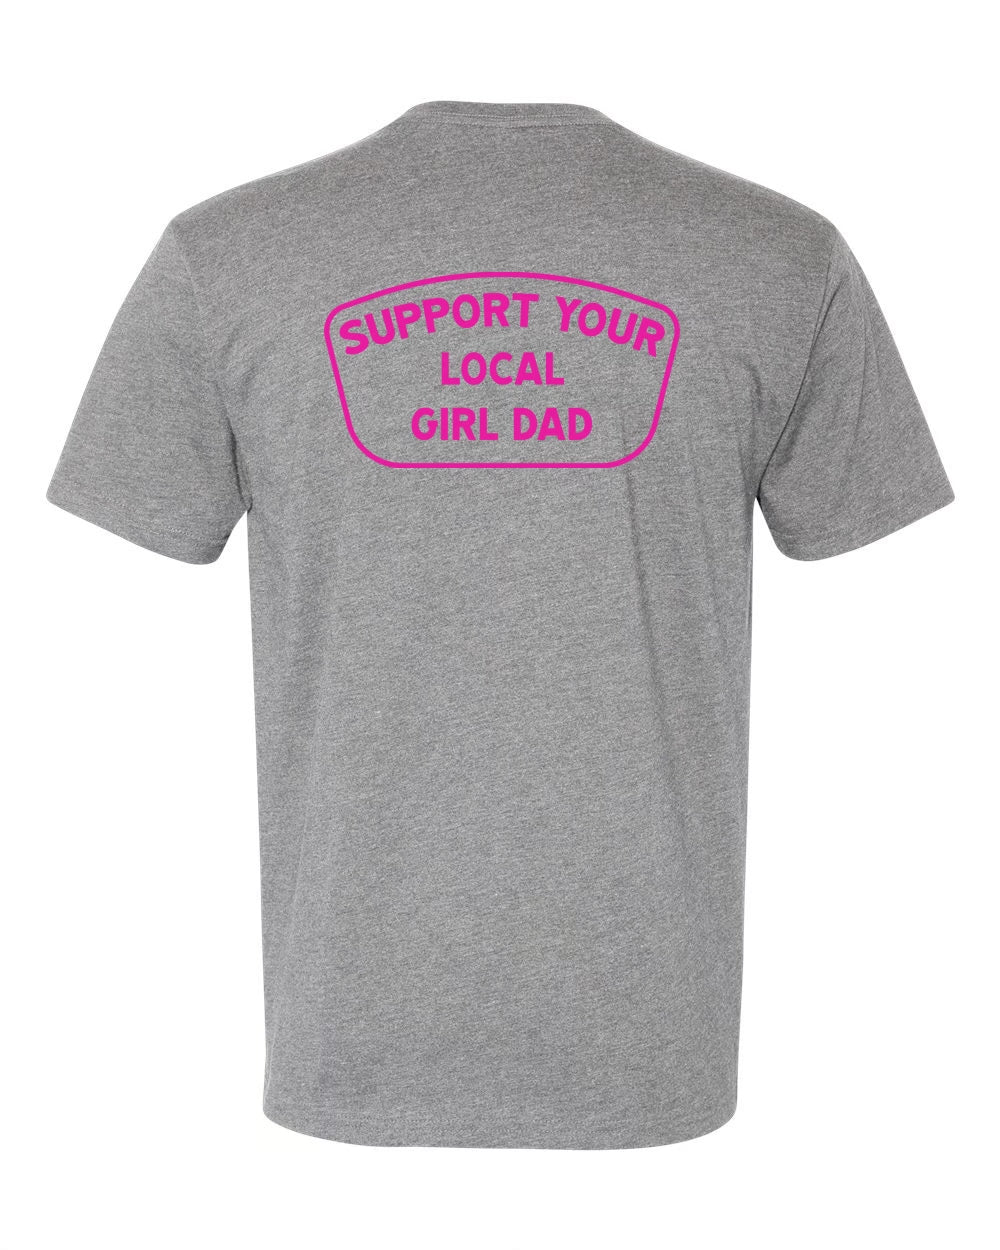 Support Your Local Girl Dad Shirt (Infrared)